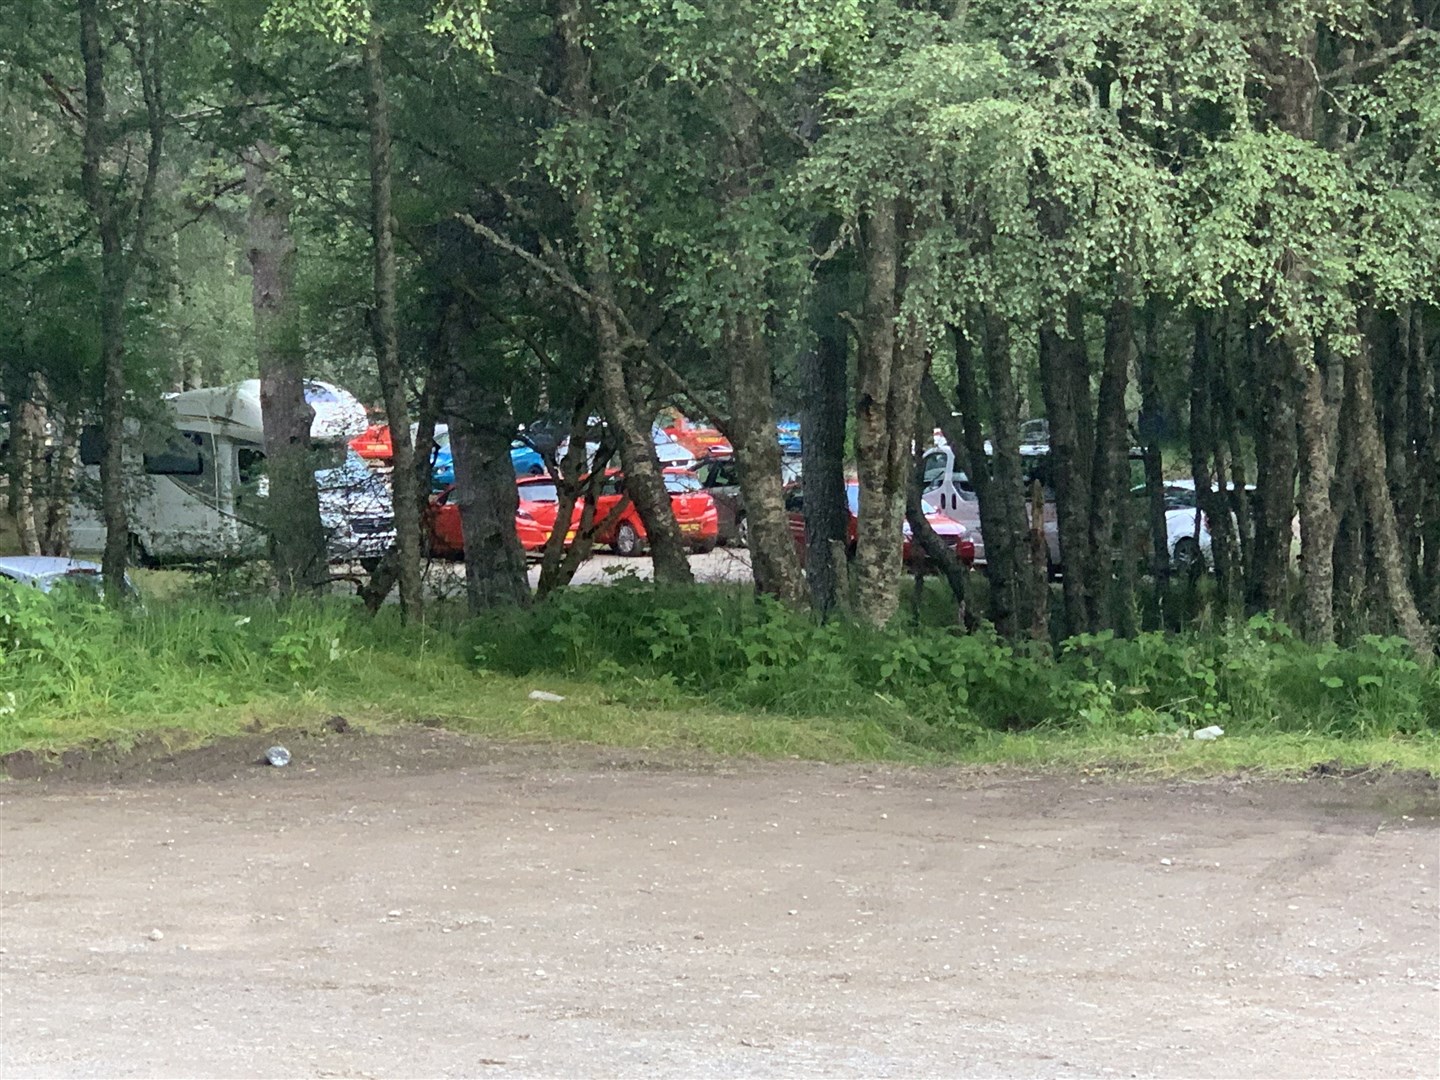 There has been a big rise in uncontrolled camping at Glenmore caused by the end of lockdown and the continuing closure of Glenmore Campsite. Cars parked the previous weekend by Loch Morlich despite a ban on overnight parking.